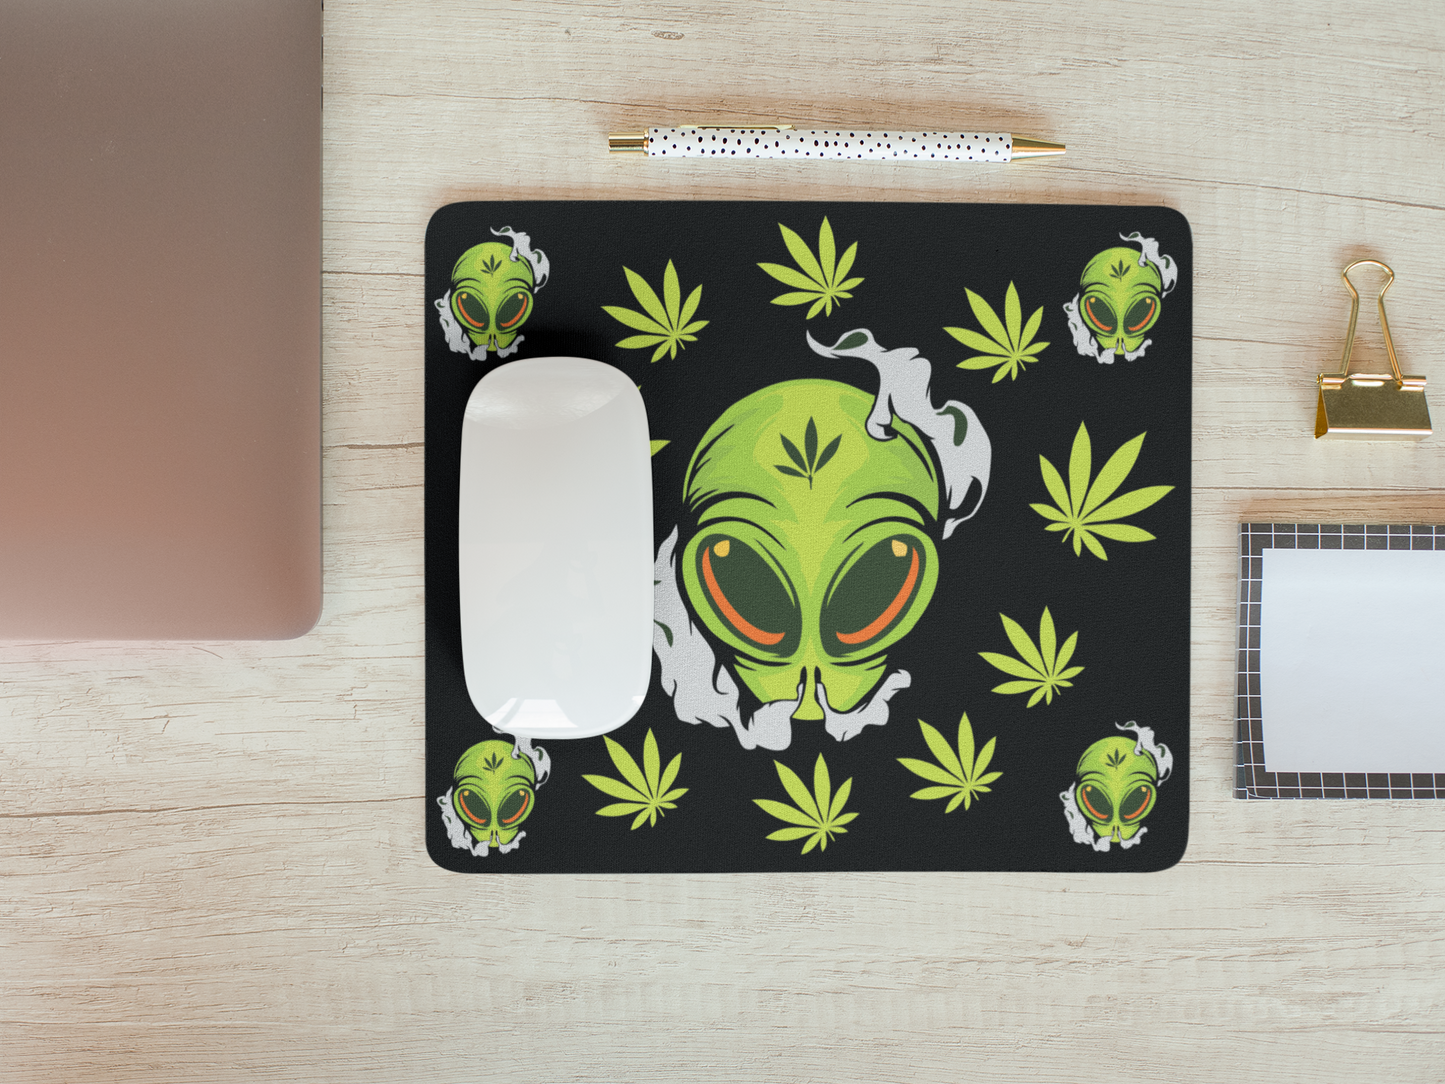 Alien Weed Mousepad For Office | Gaming | School. Mousepad for Laptop and Desktop